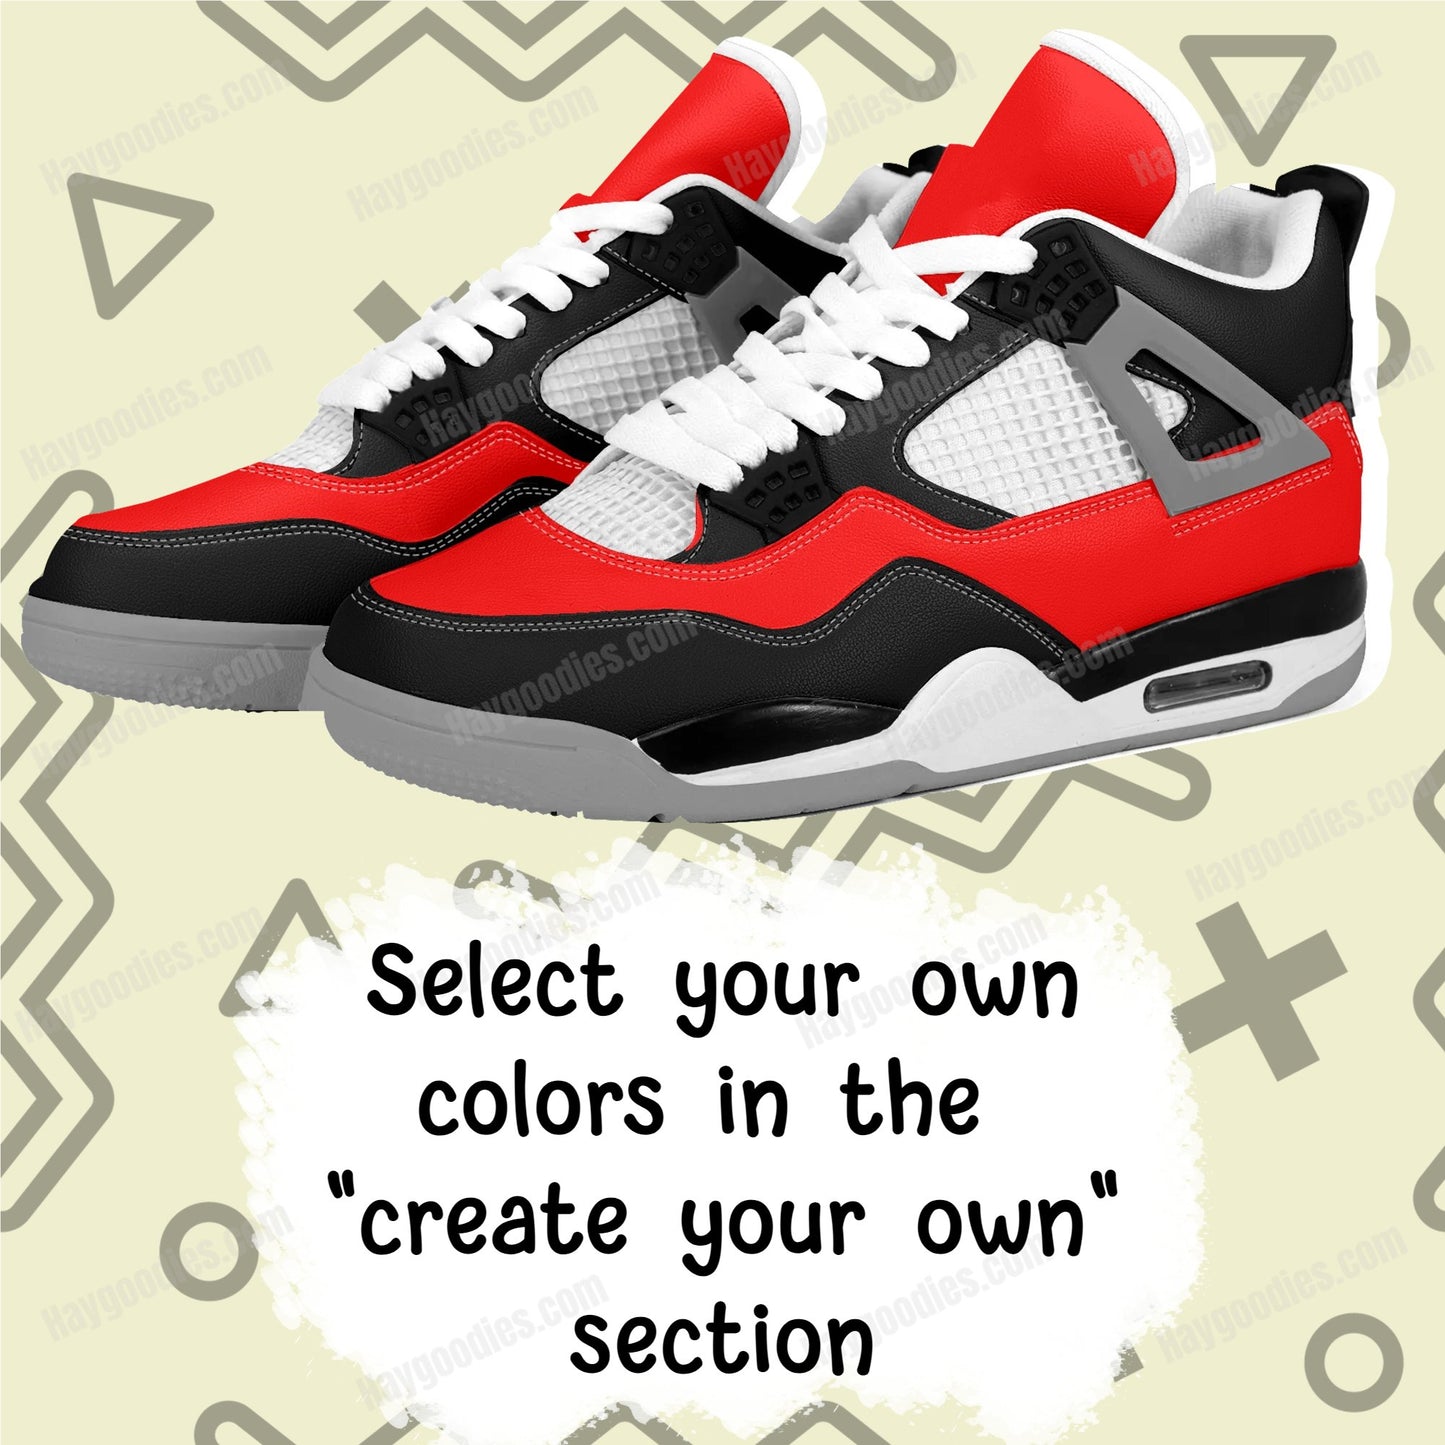 Red Color Retro Low Top J4 Style Sneakers